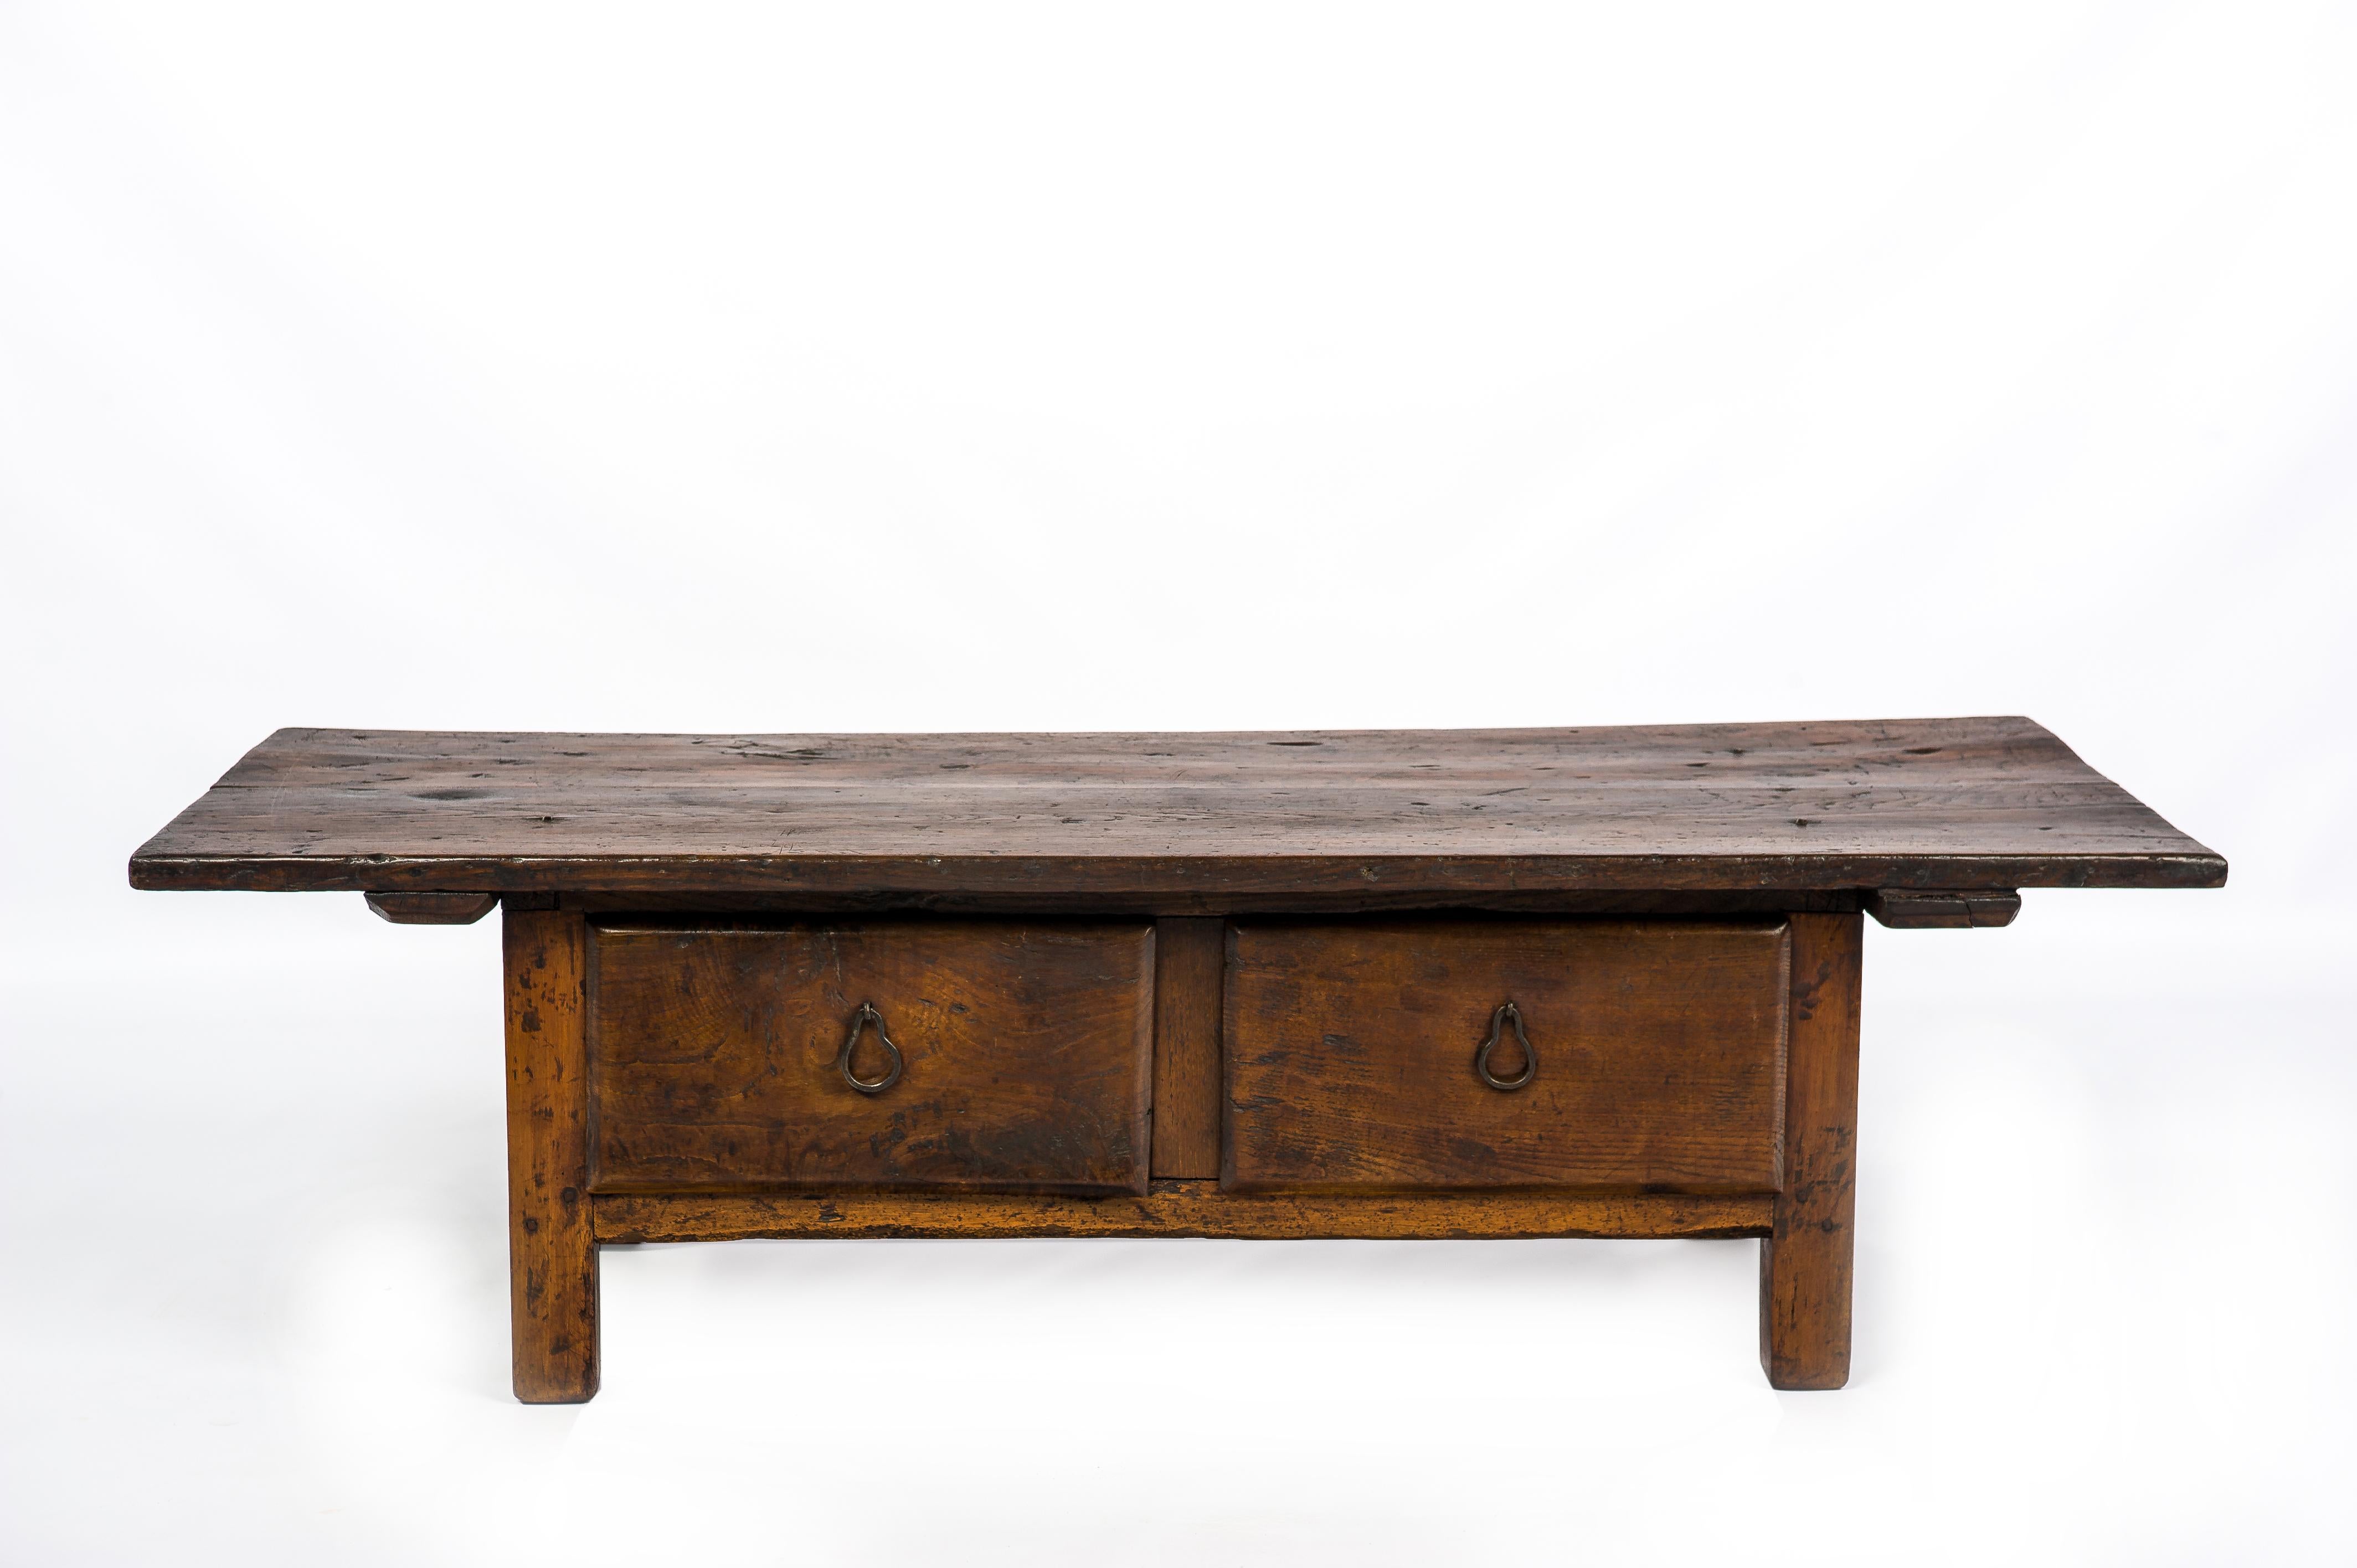 Forged Antique 18th-Century Rustic Spanish Warm Brown Chestnut Coffee Table For Sale